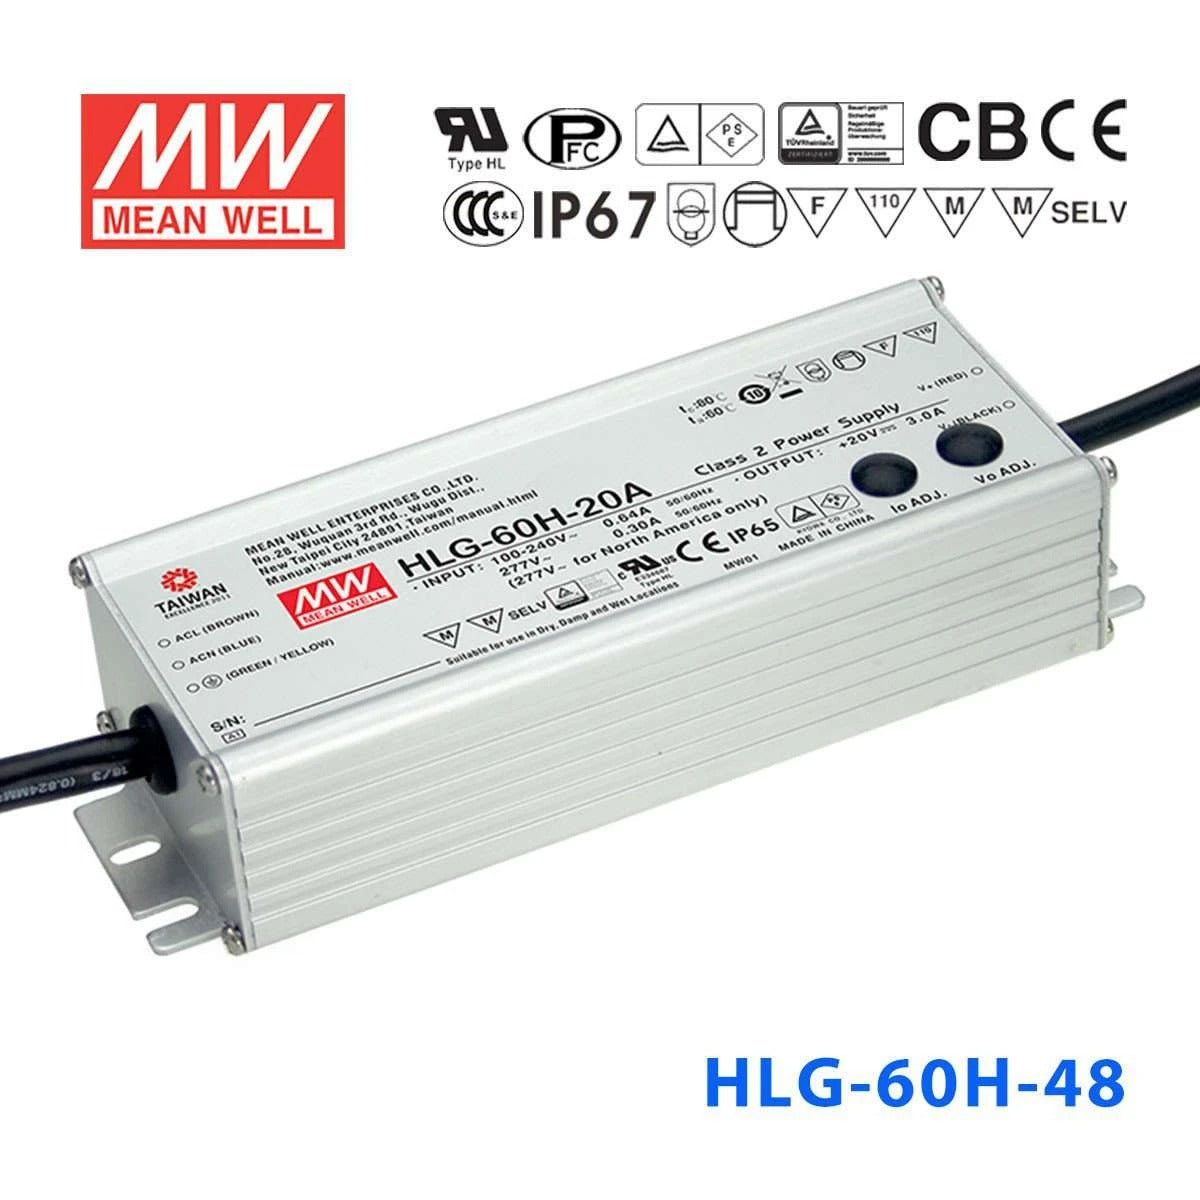 Mean Well HLG-60H-48 Power Supply 60W 48V